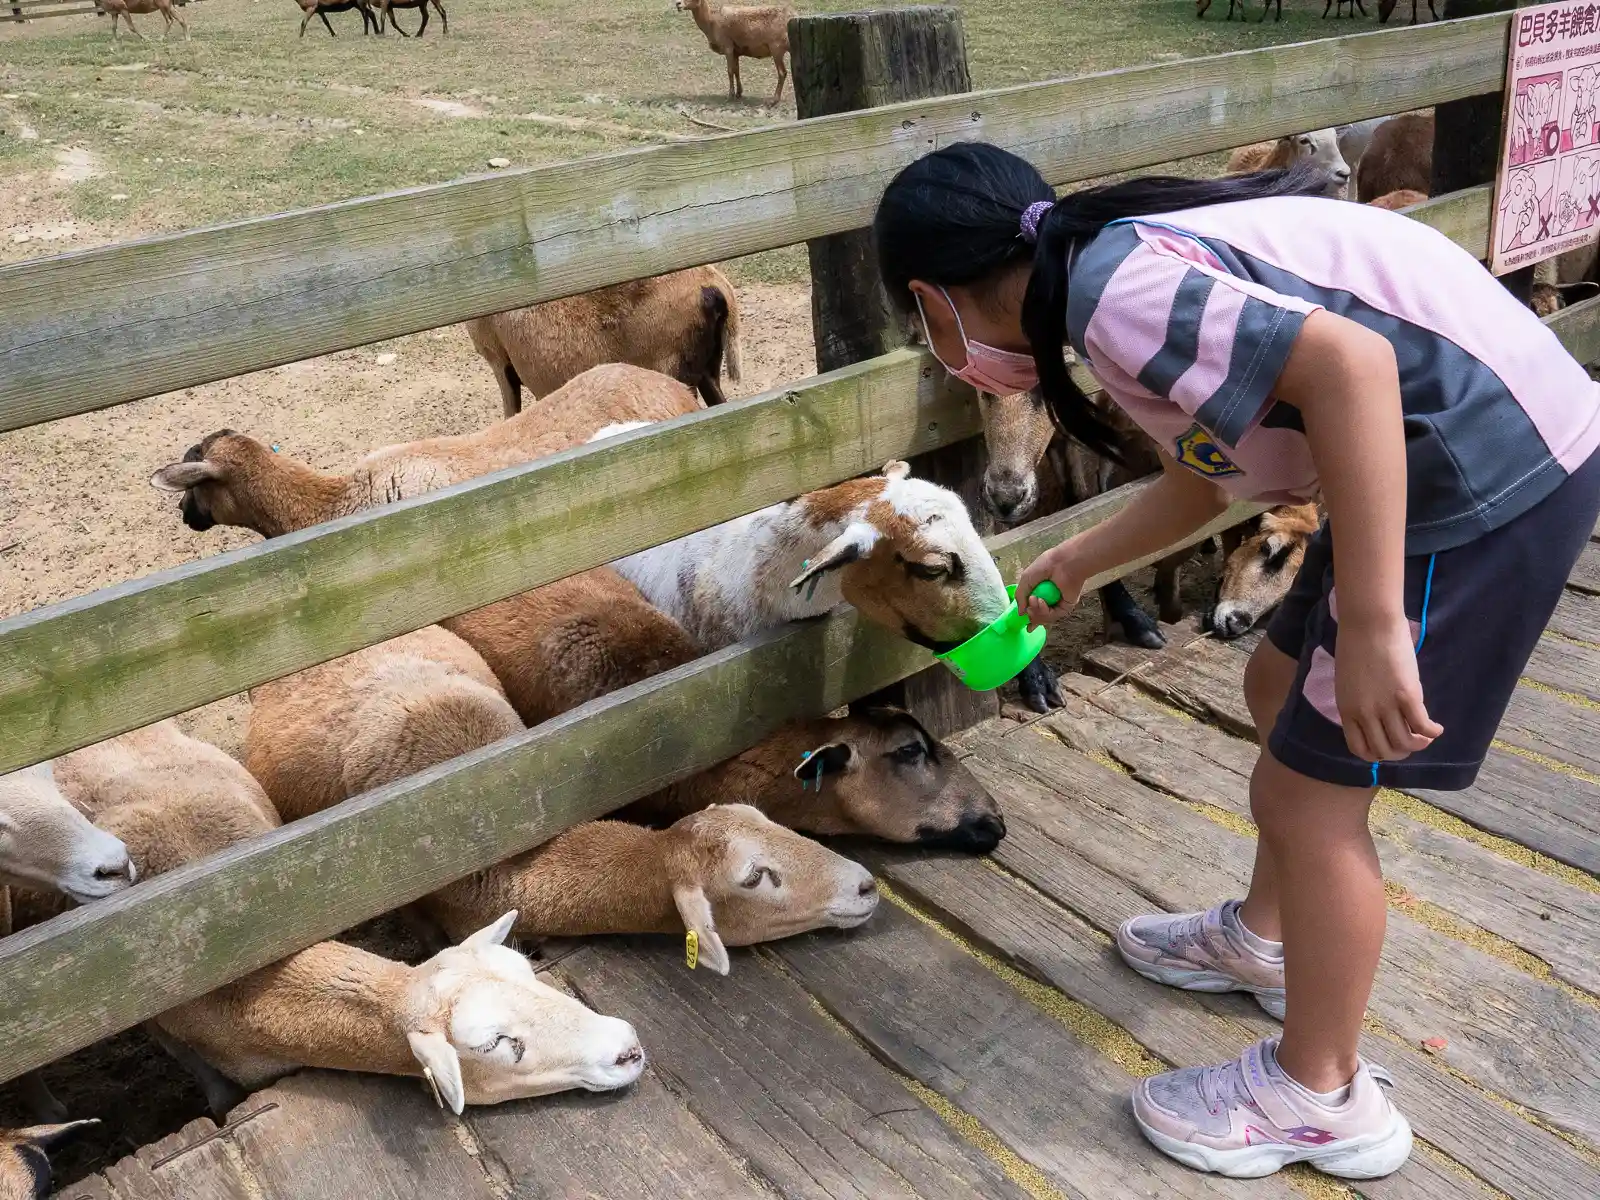 A young female student feeds sheep through a fence.